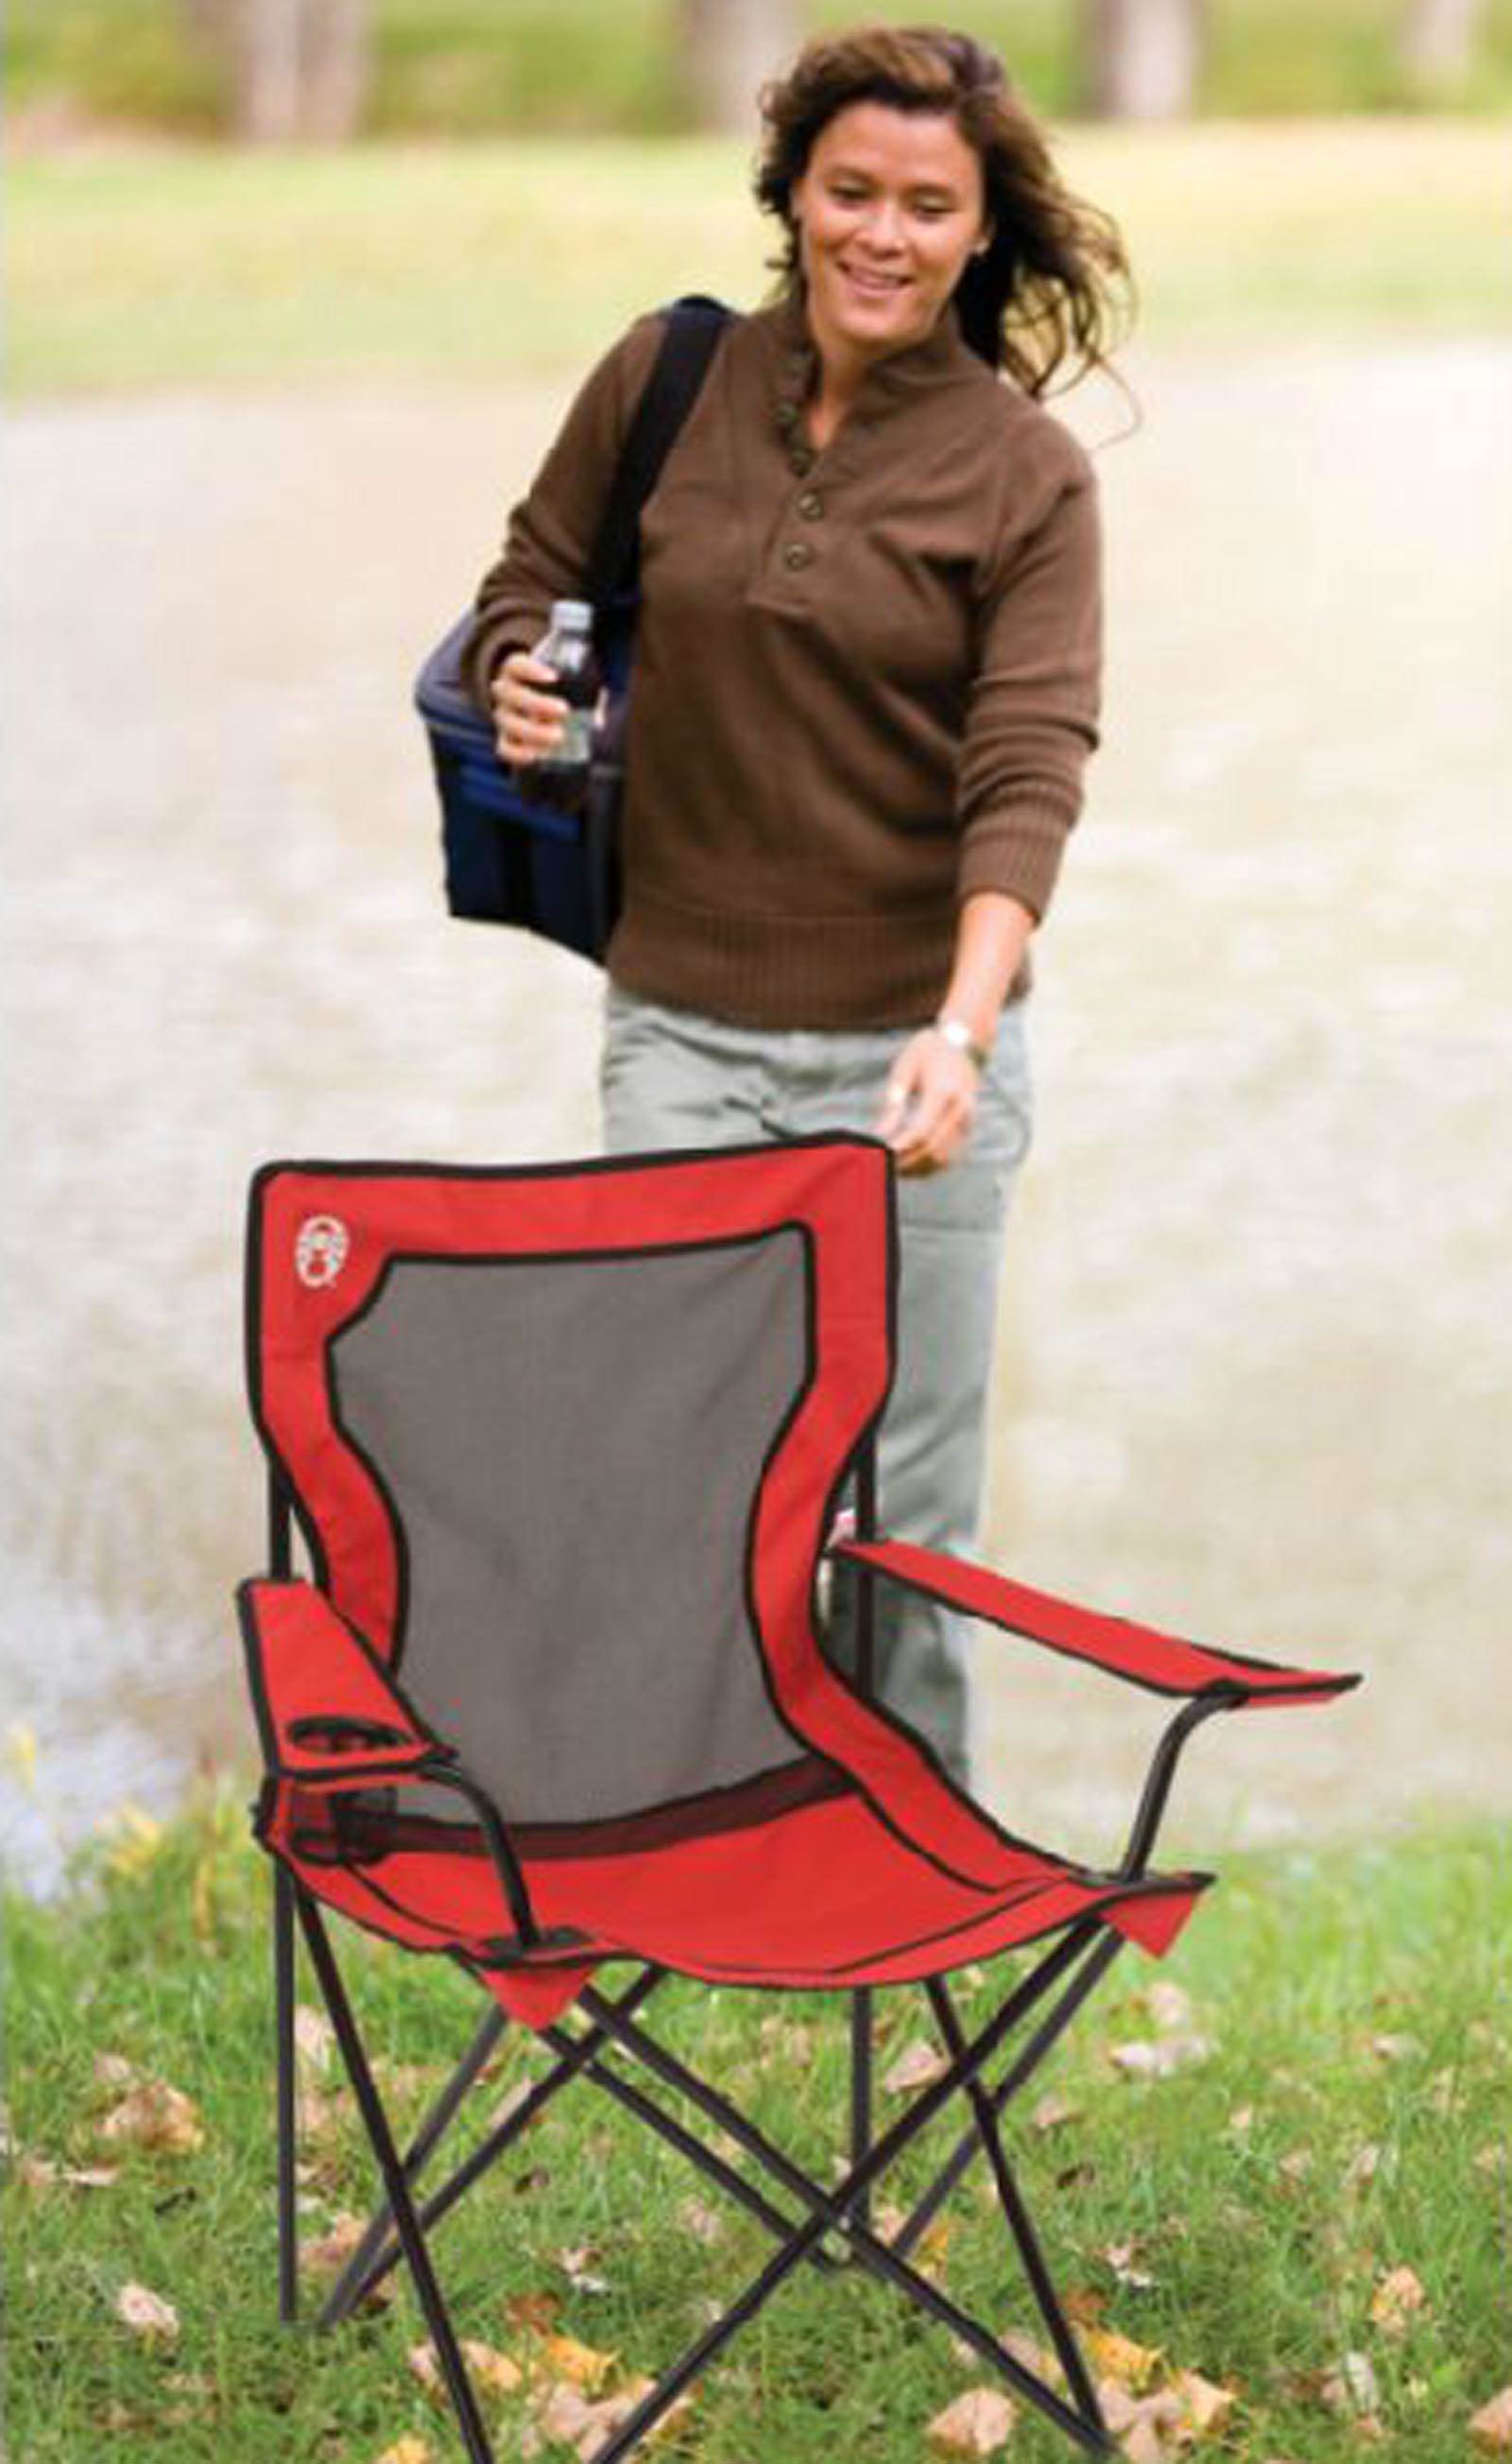 Coleman Broadband Mesh Quad Adult Camping Chair, Red - image 2 of 5